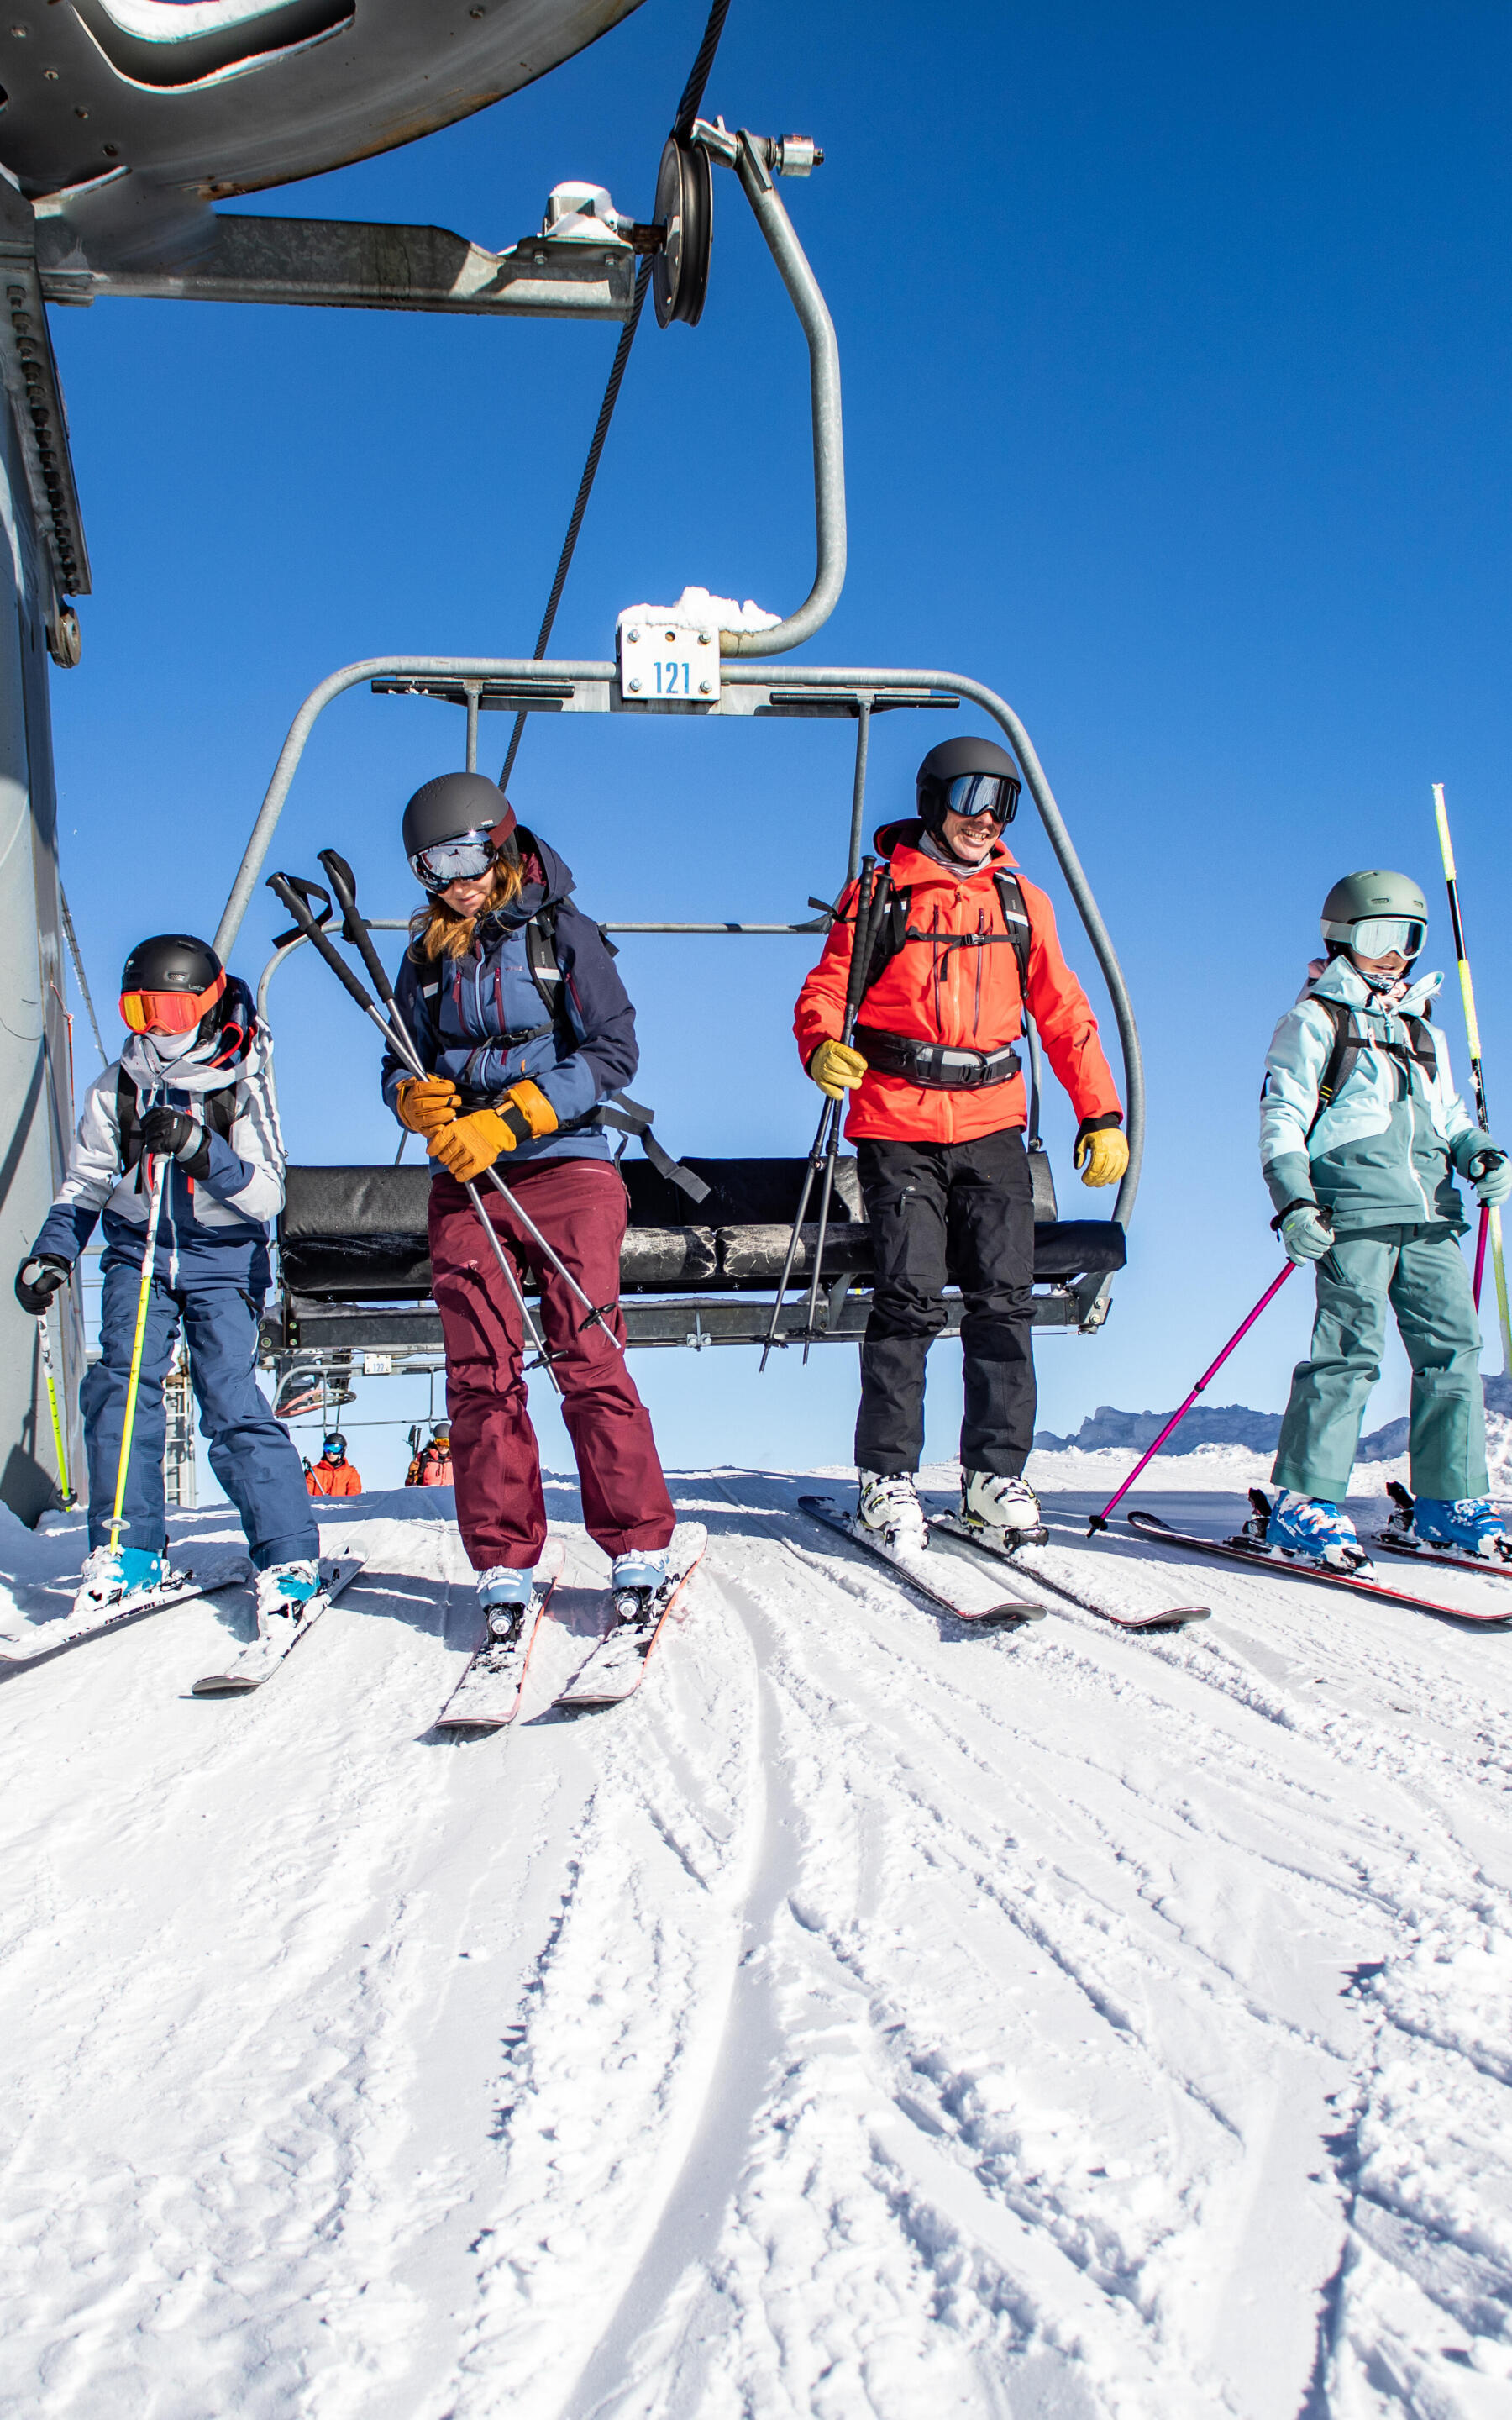 Four friends coming out of the chairlift.